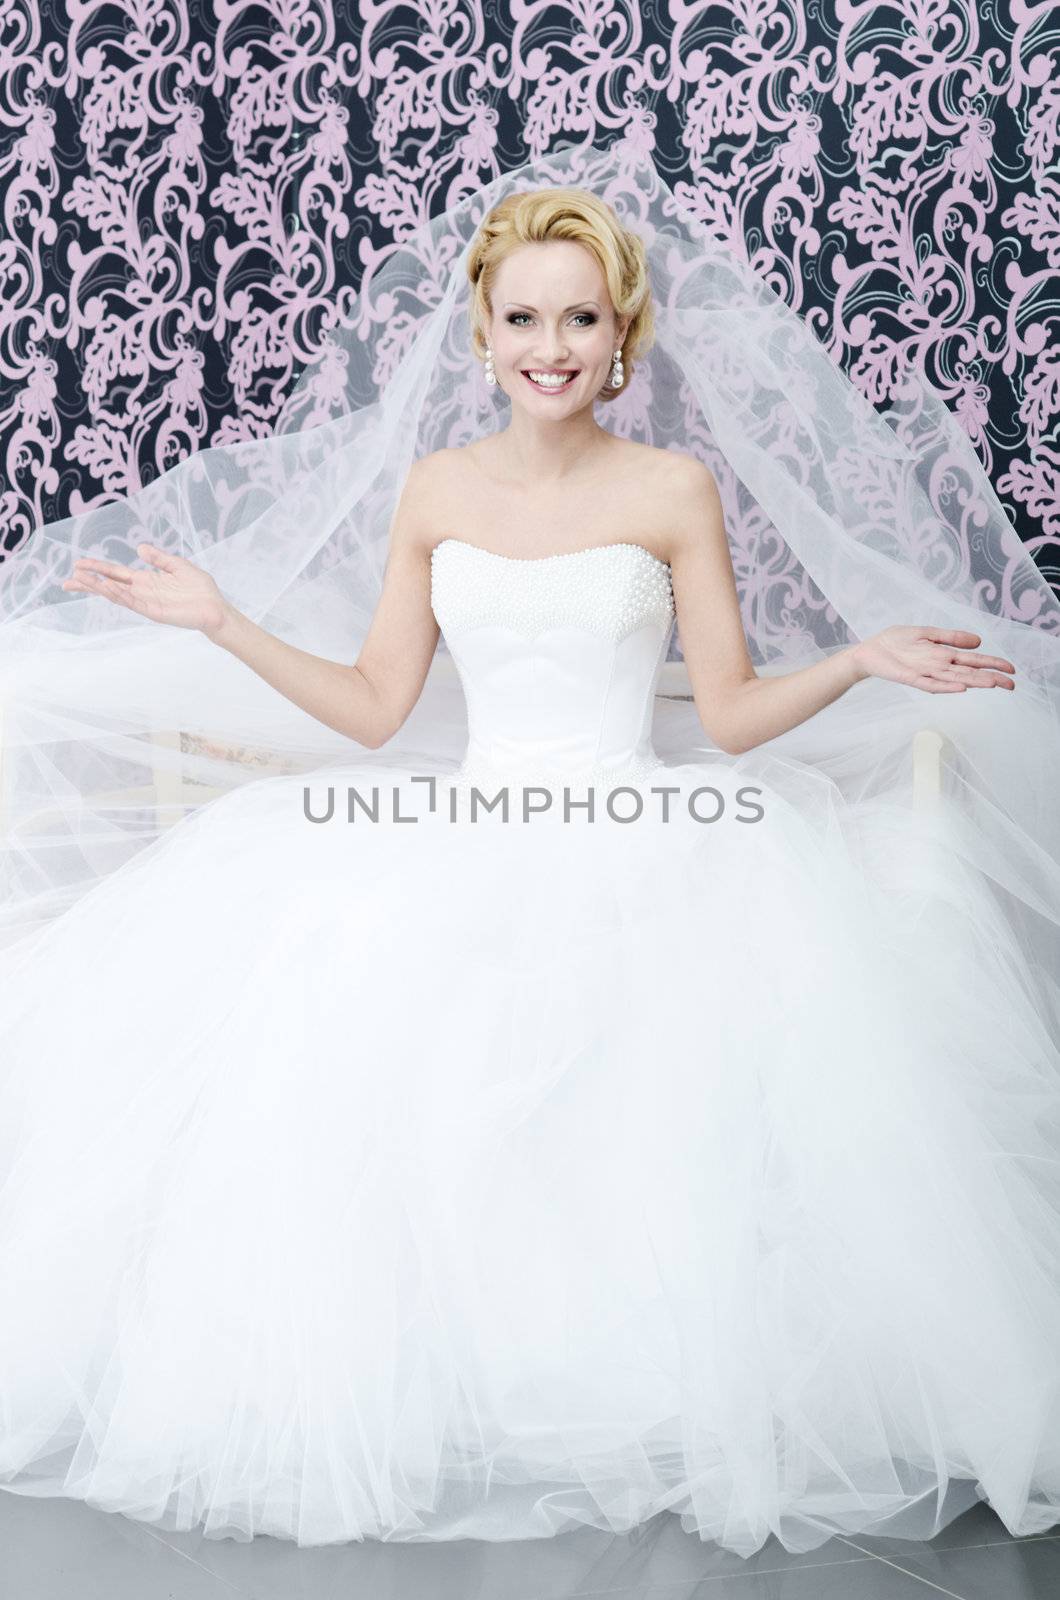 Bride with smile and opened arms by zakaz